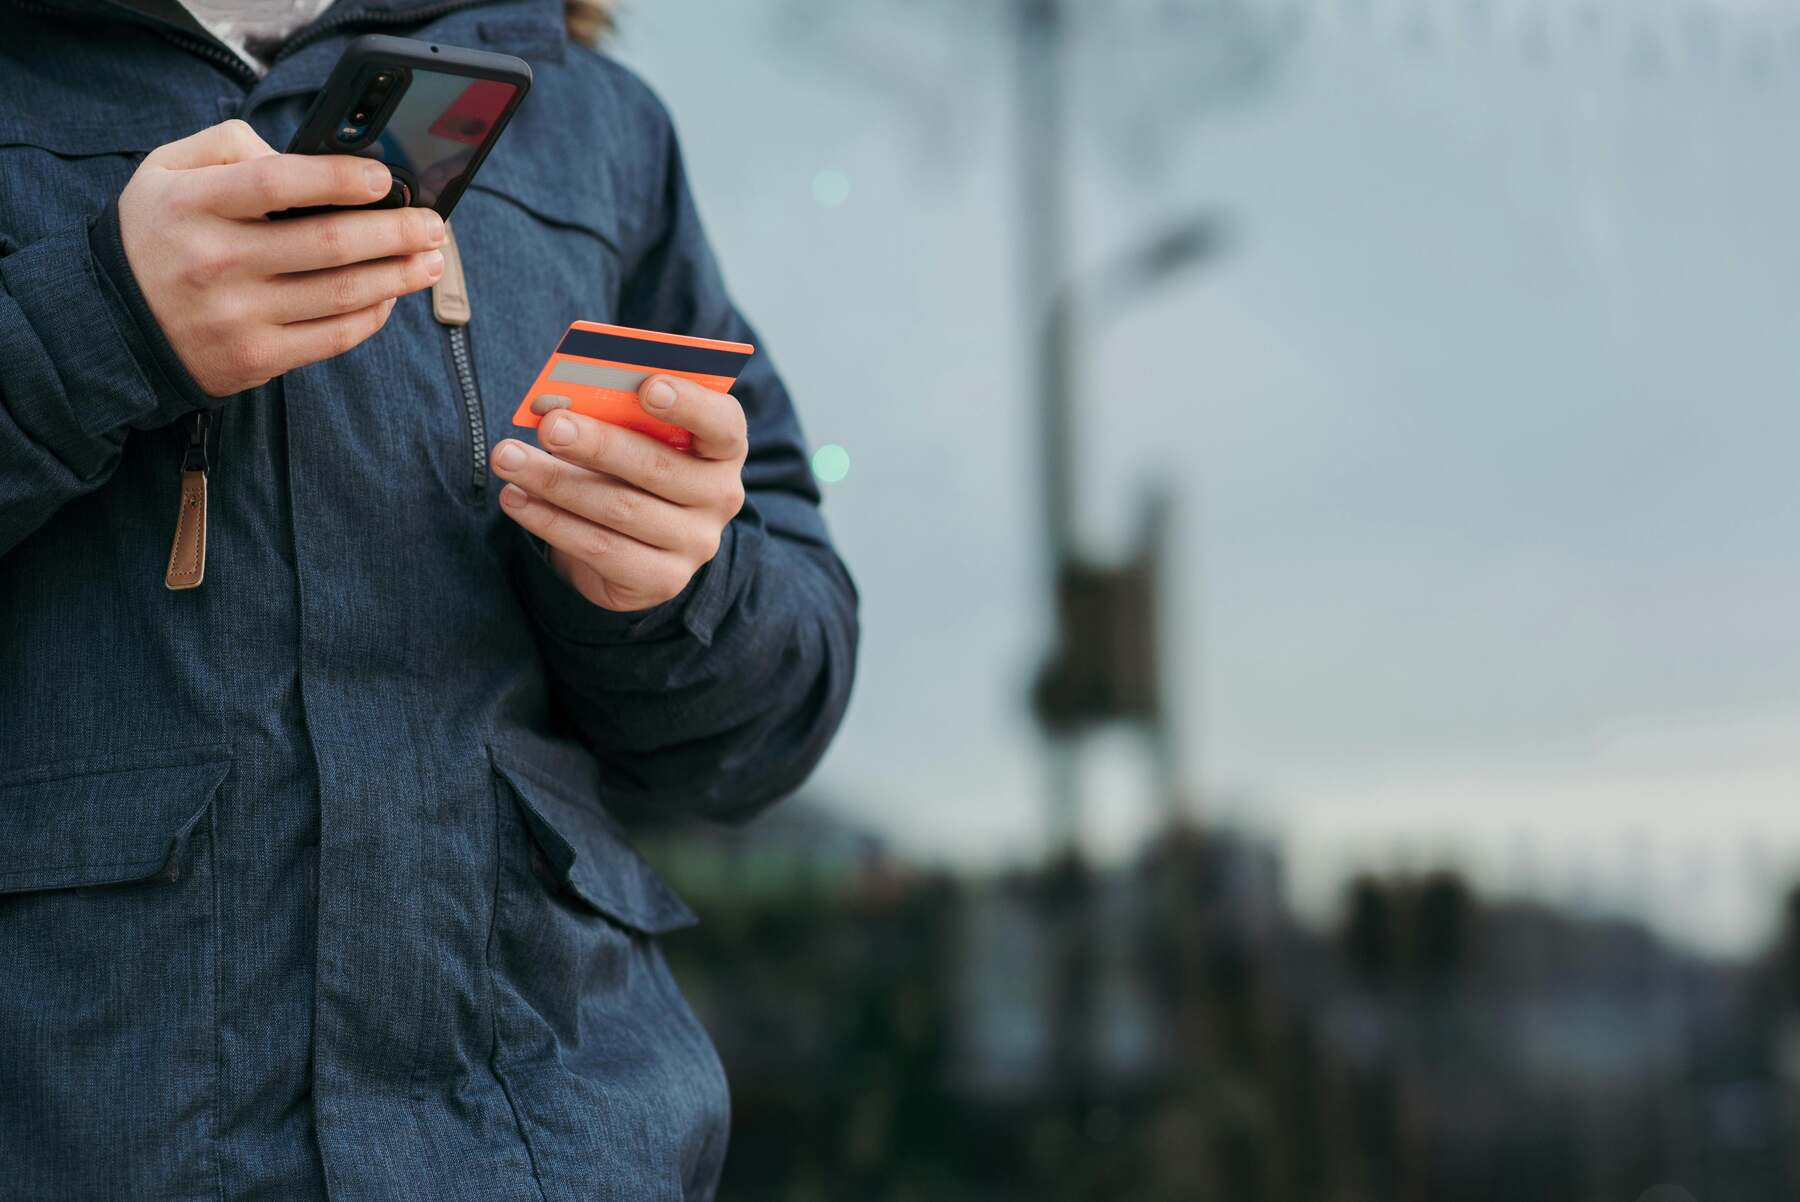 A man outside holding an orange credit card and phone